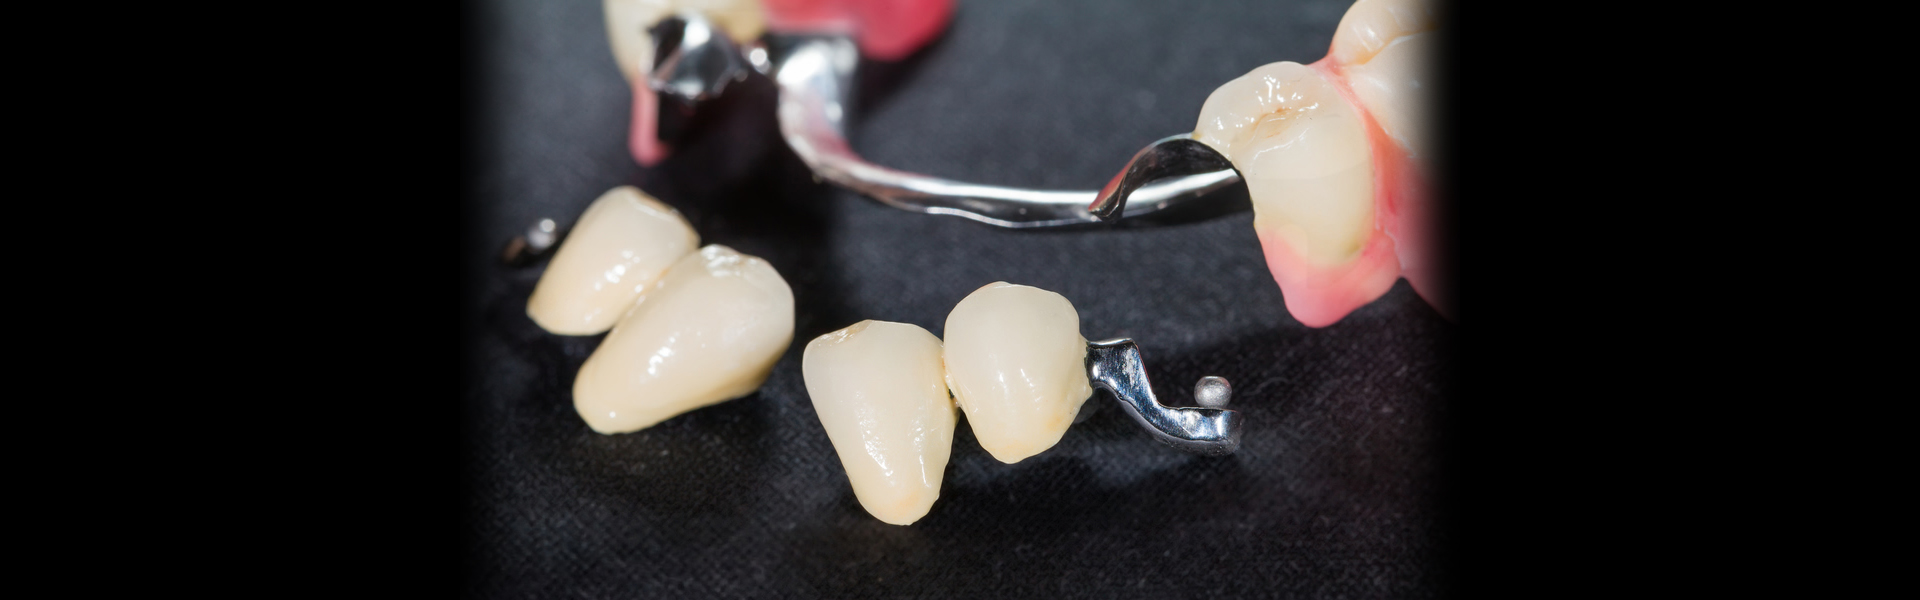 Porcelain Veneers: An Inside Look Into the Procedure, Costs, Pros/Cons, and FAQs